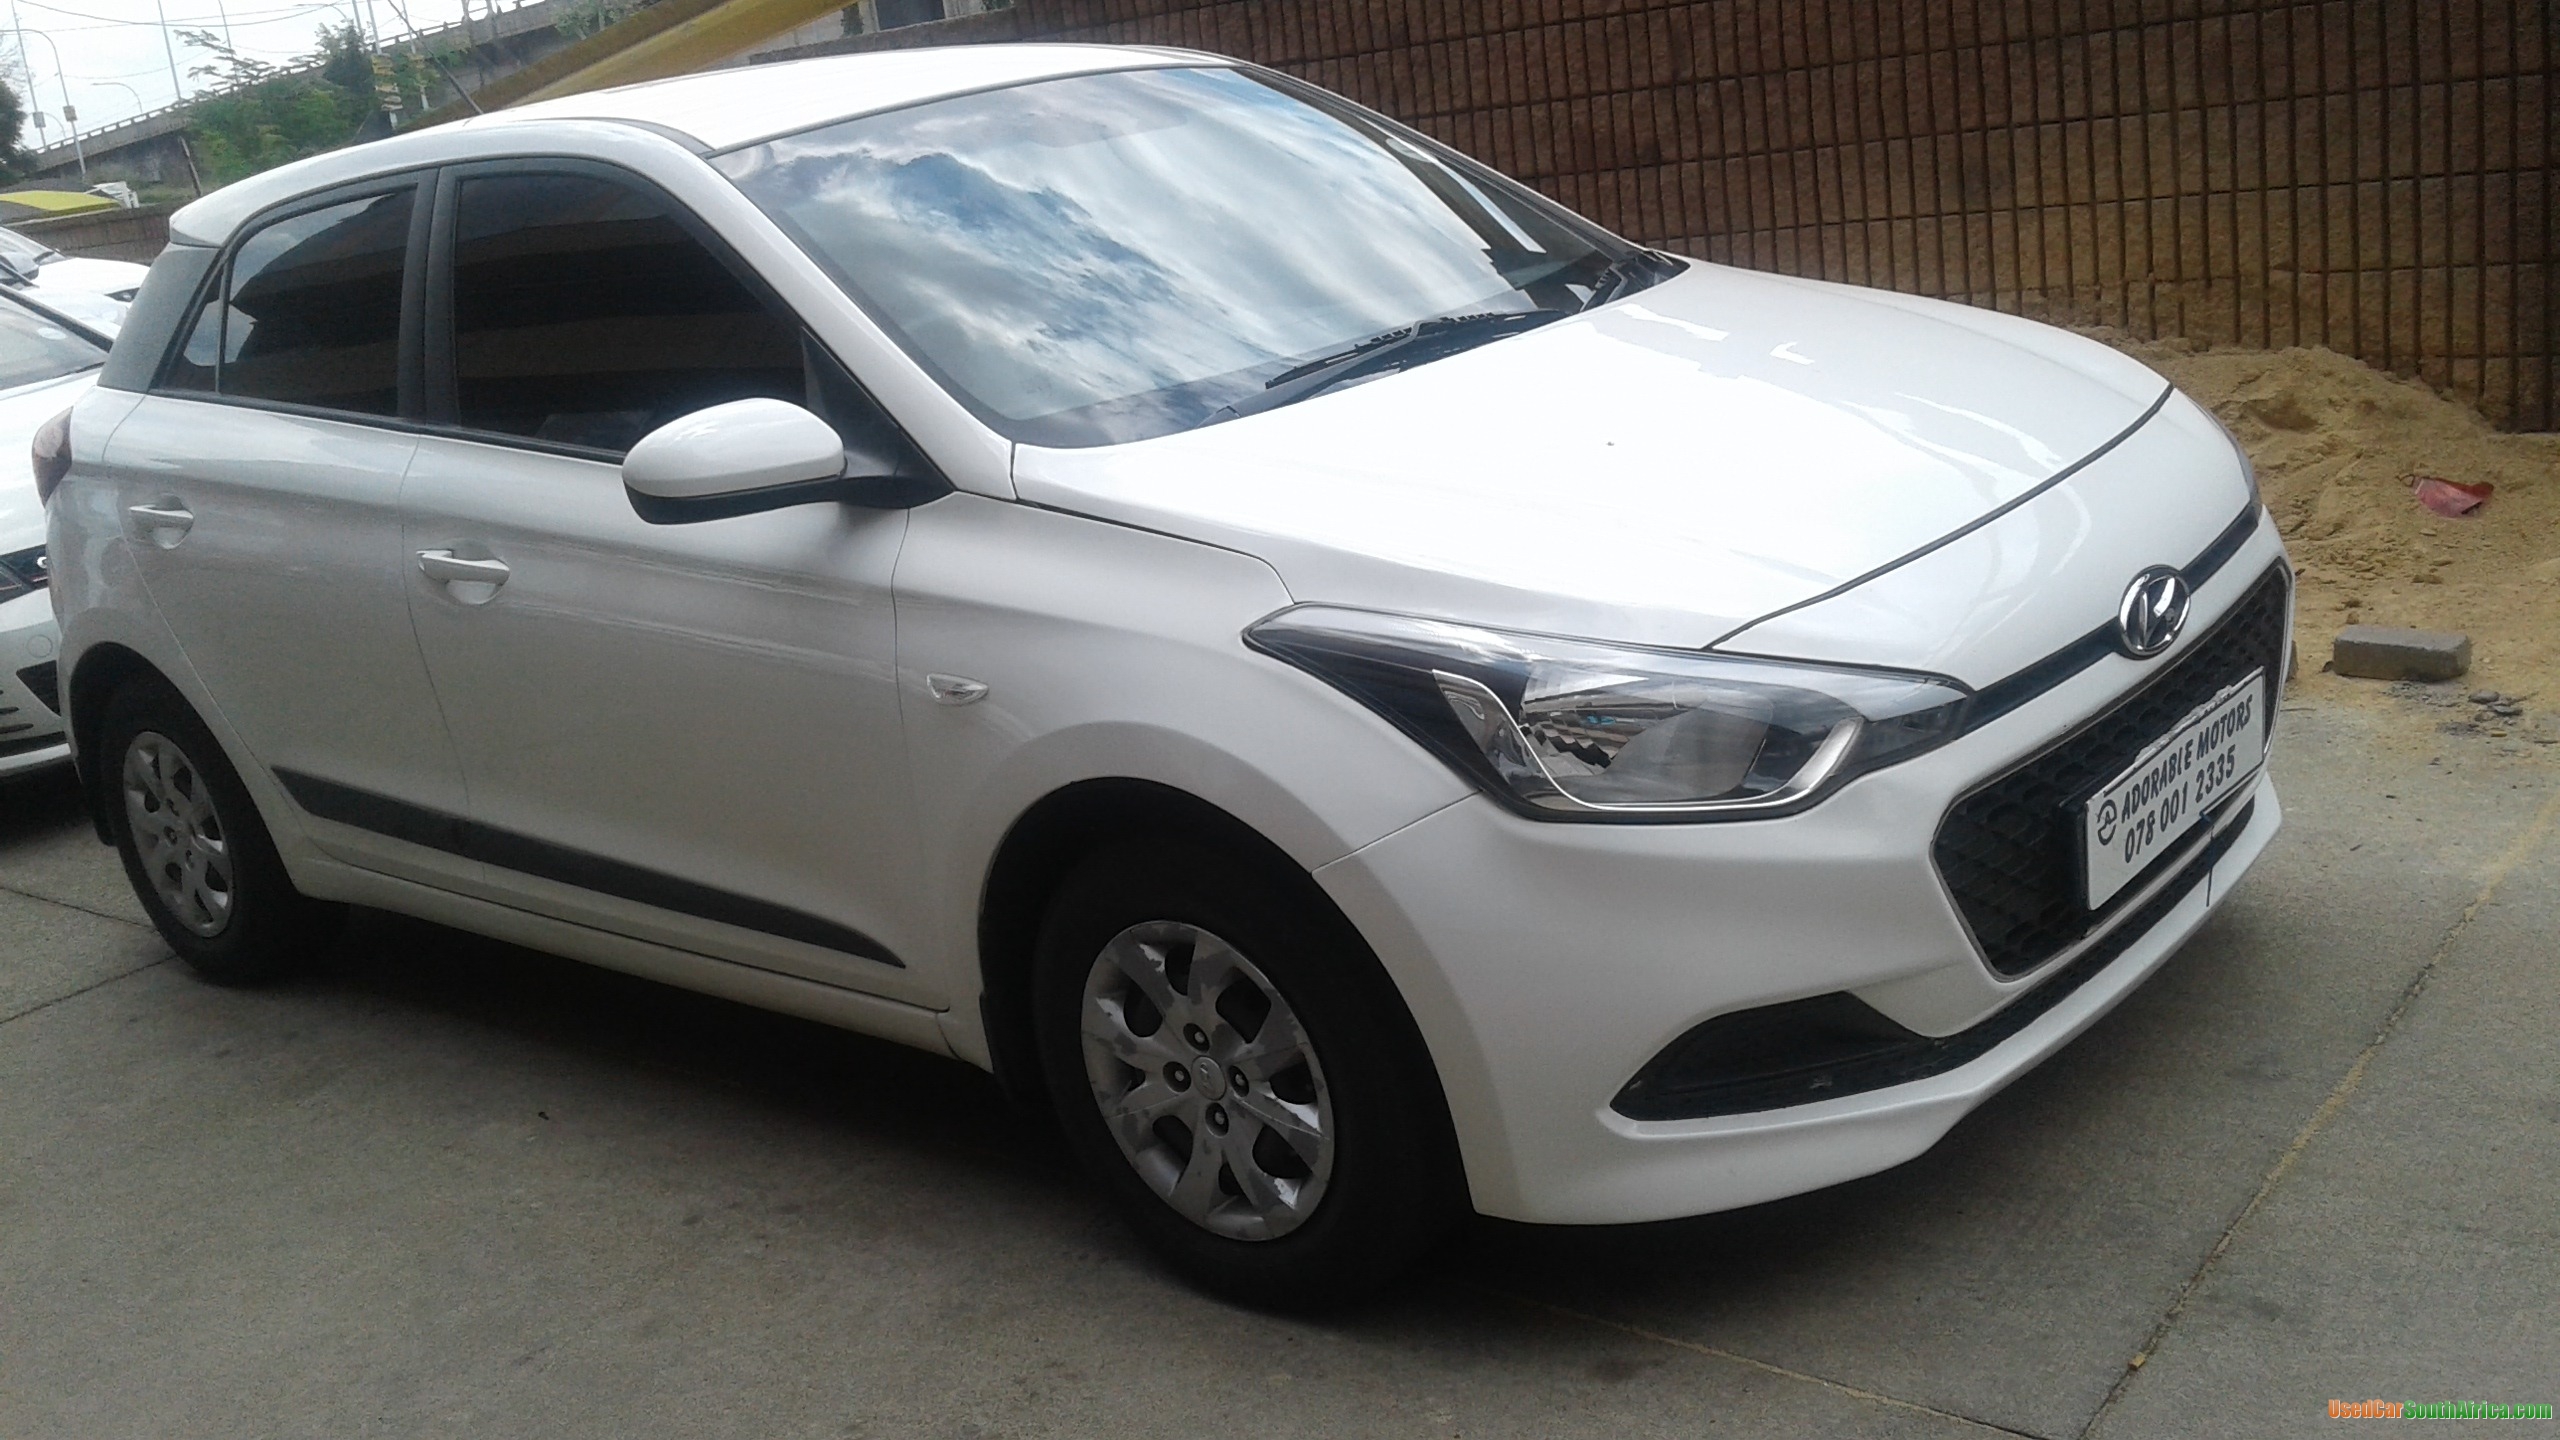 2016 Hyundai I20 2015 I20 1.2 Fluid used car for sale in Johannesburg South Gauteng South Africa - OnlyCars.co.za